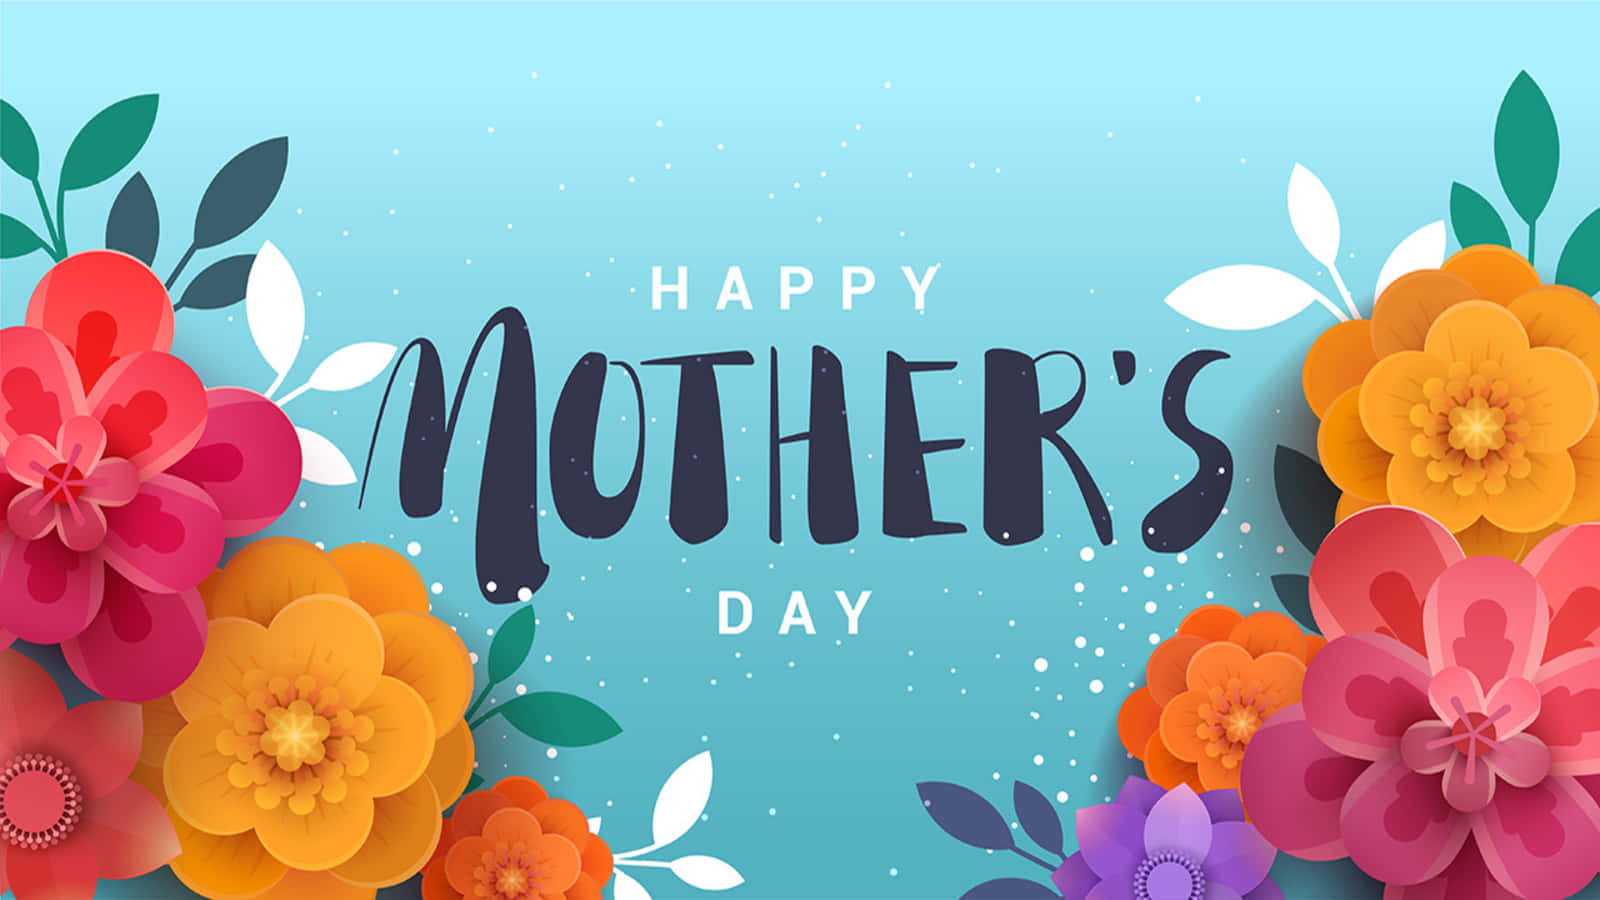 Celebrate mother's day this year with love and kindness.